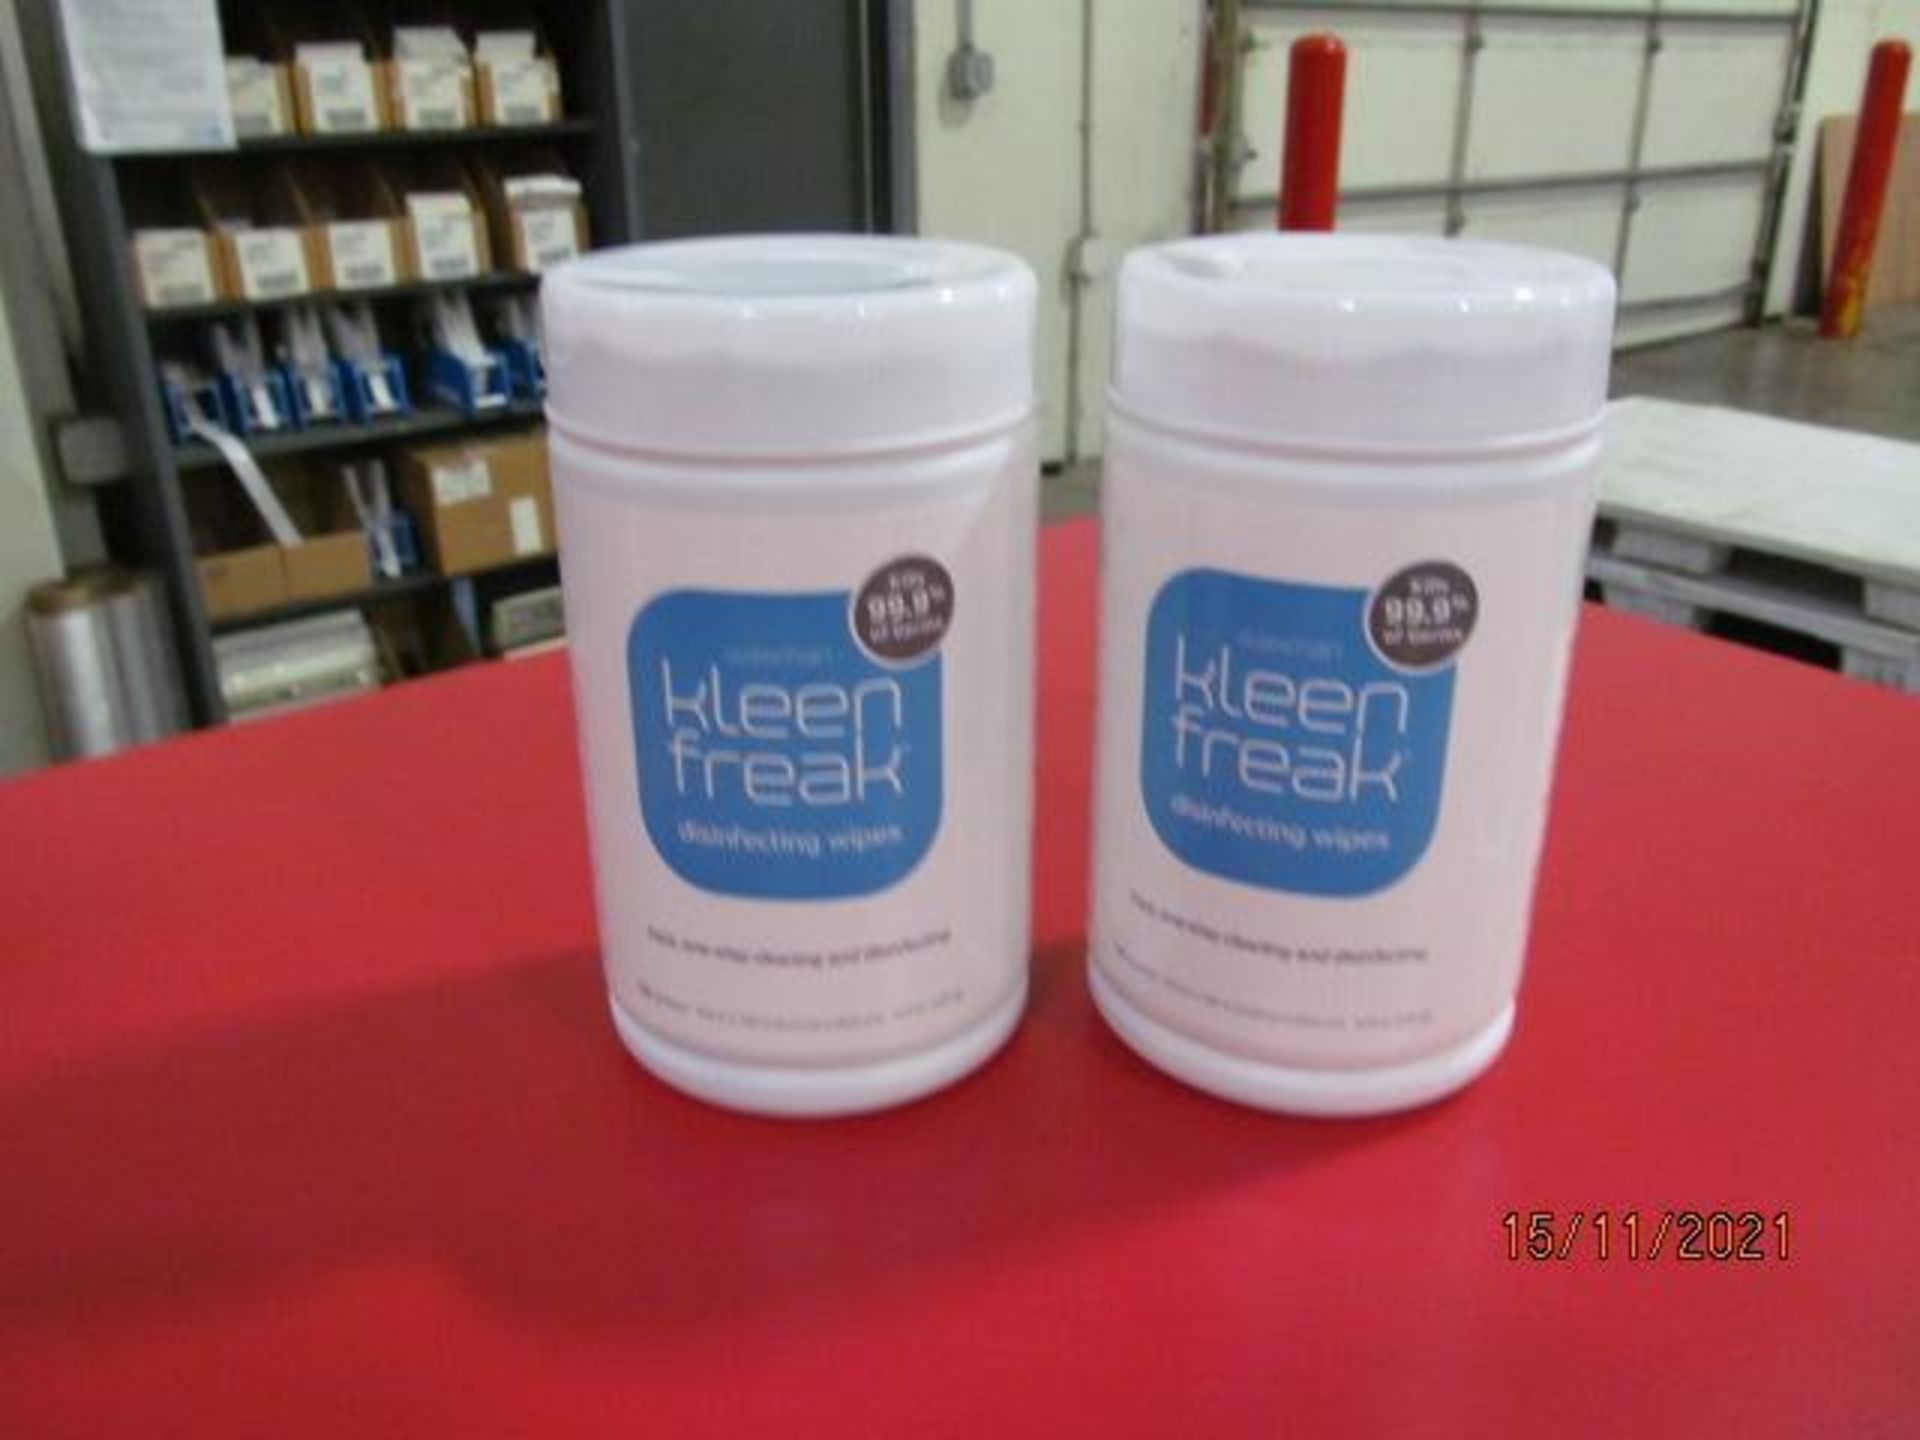 Lot of Waxman Kleen Freak Sanitizing Wipes consisting of 366,768 packages on 566 pallets. Each packa - Image 4 of 11